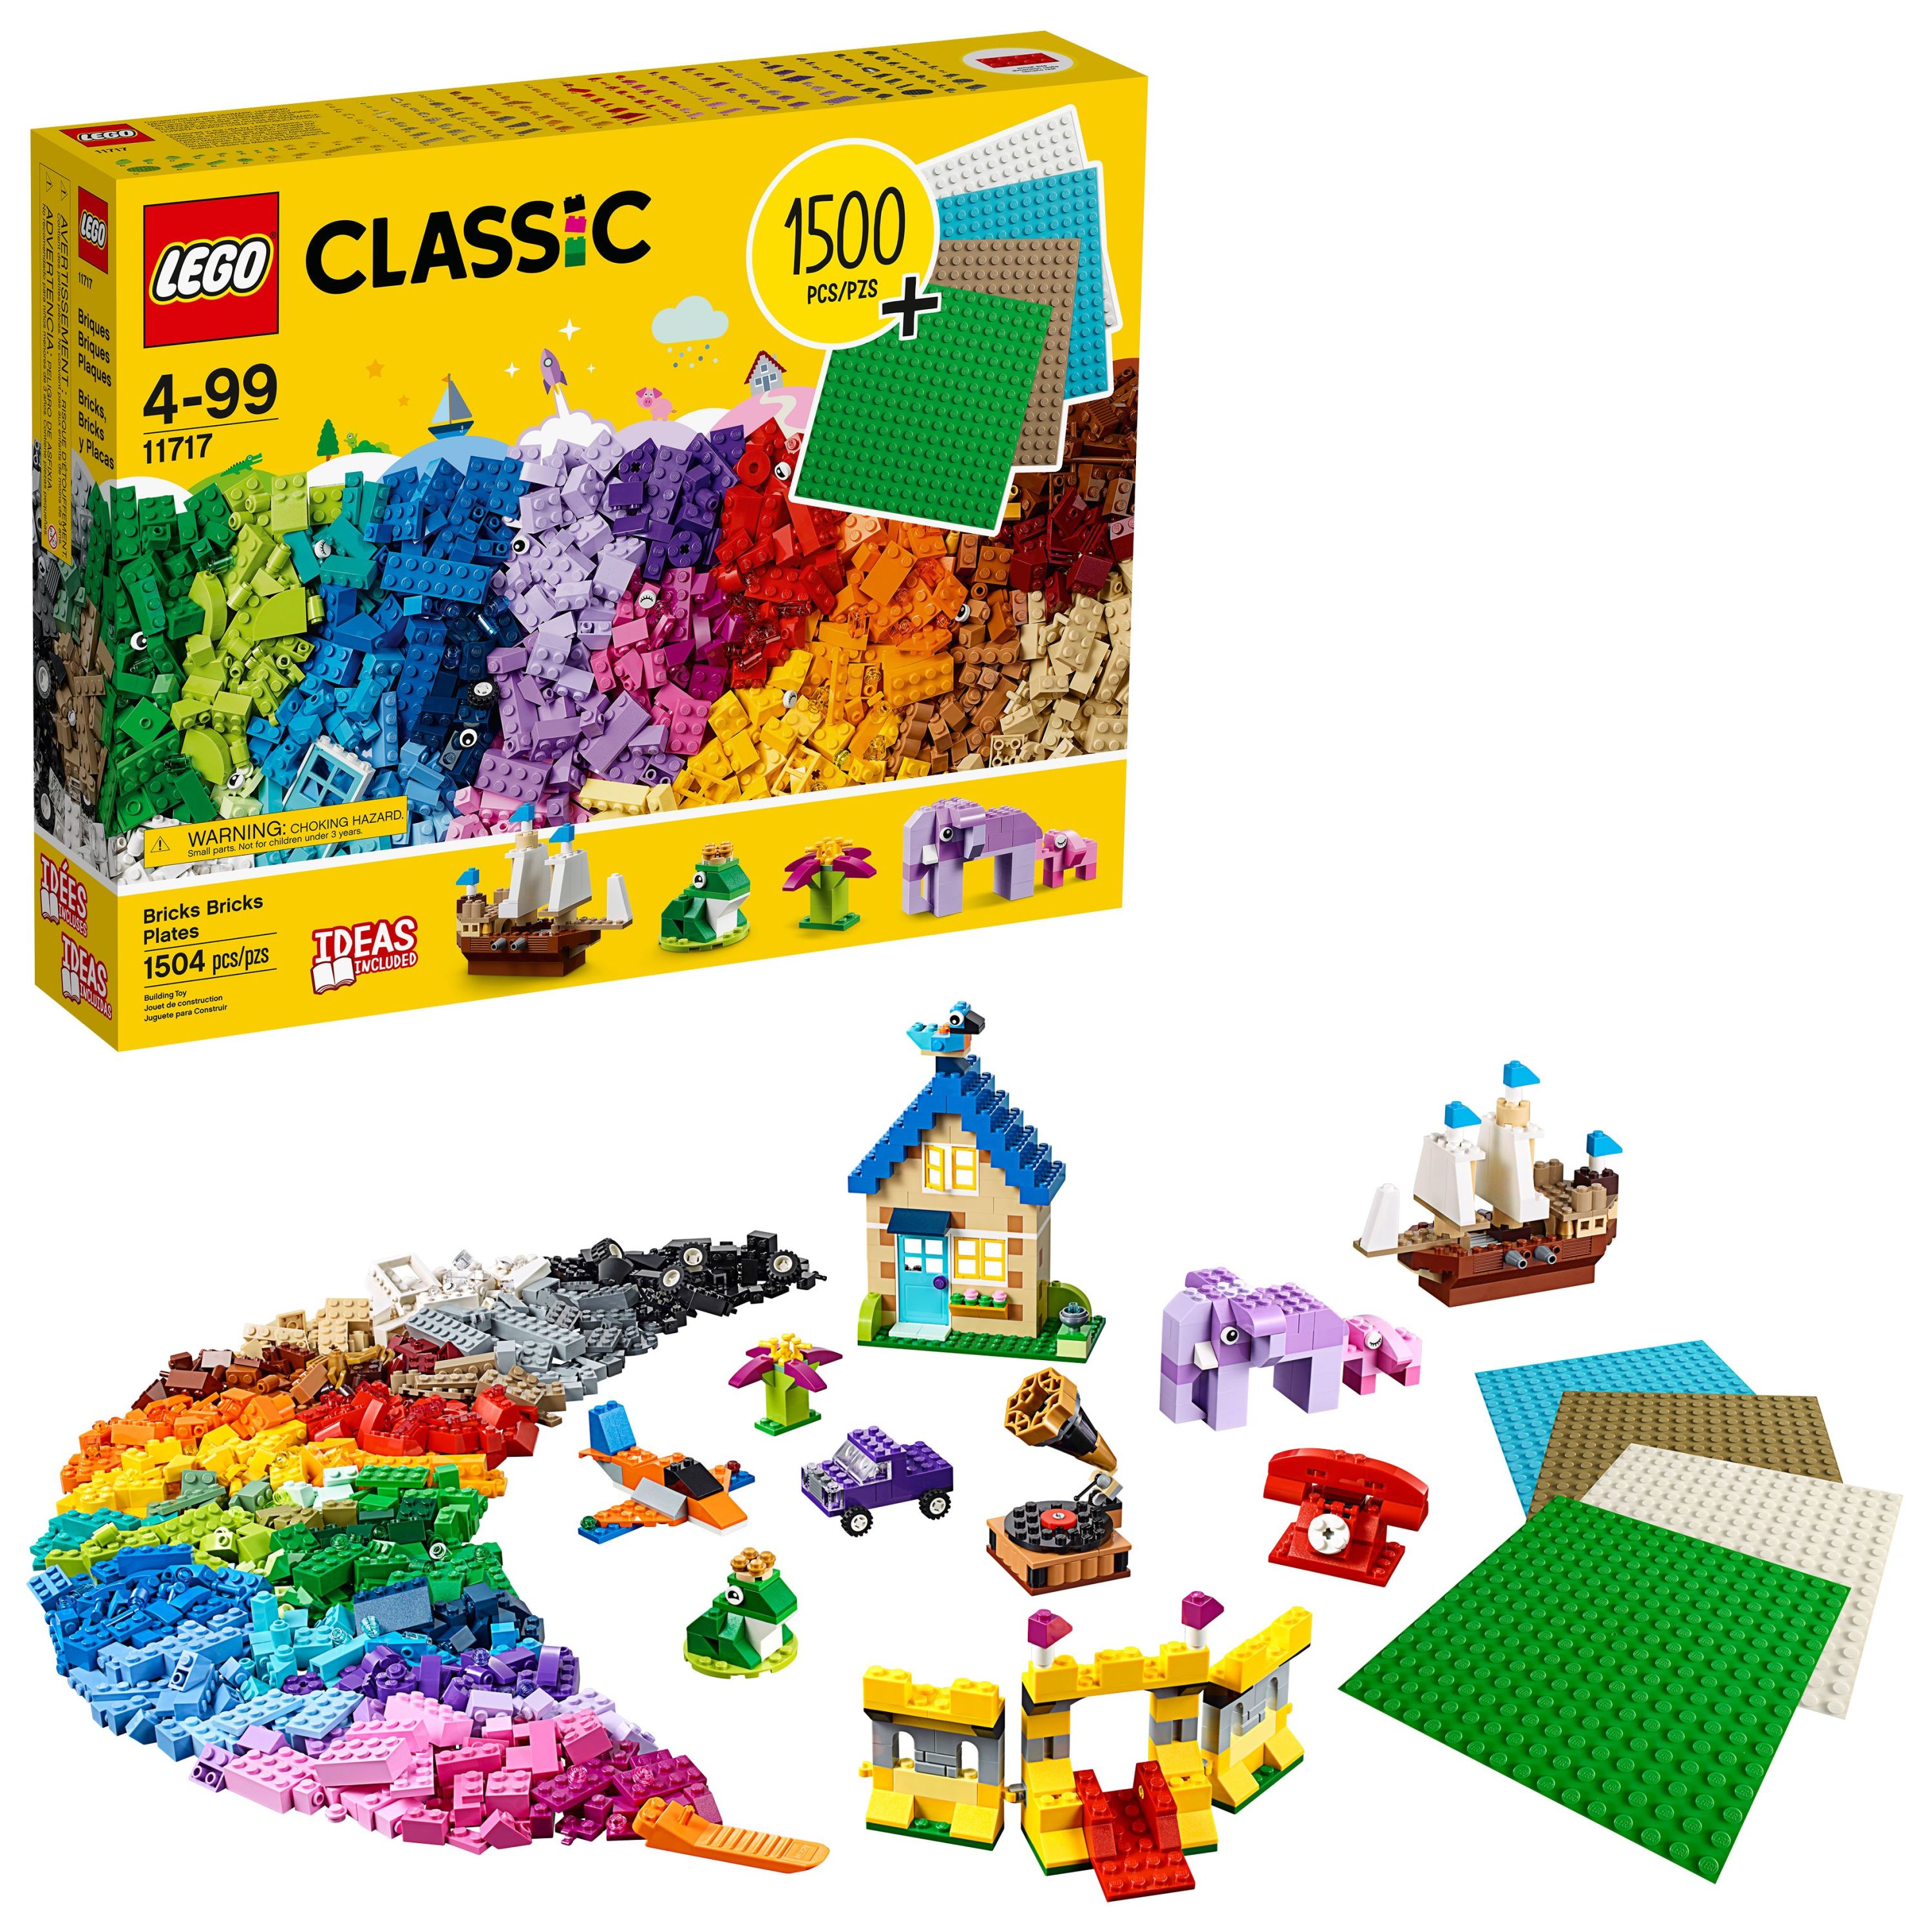 LEGO Classic Bricks Bricks Plates 11717 Building Toy; Great Gift for Kids; Imaginative, Creative, Educational Play Toy (1504 Pieces) - image 1 of 7